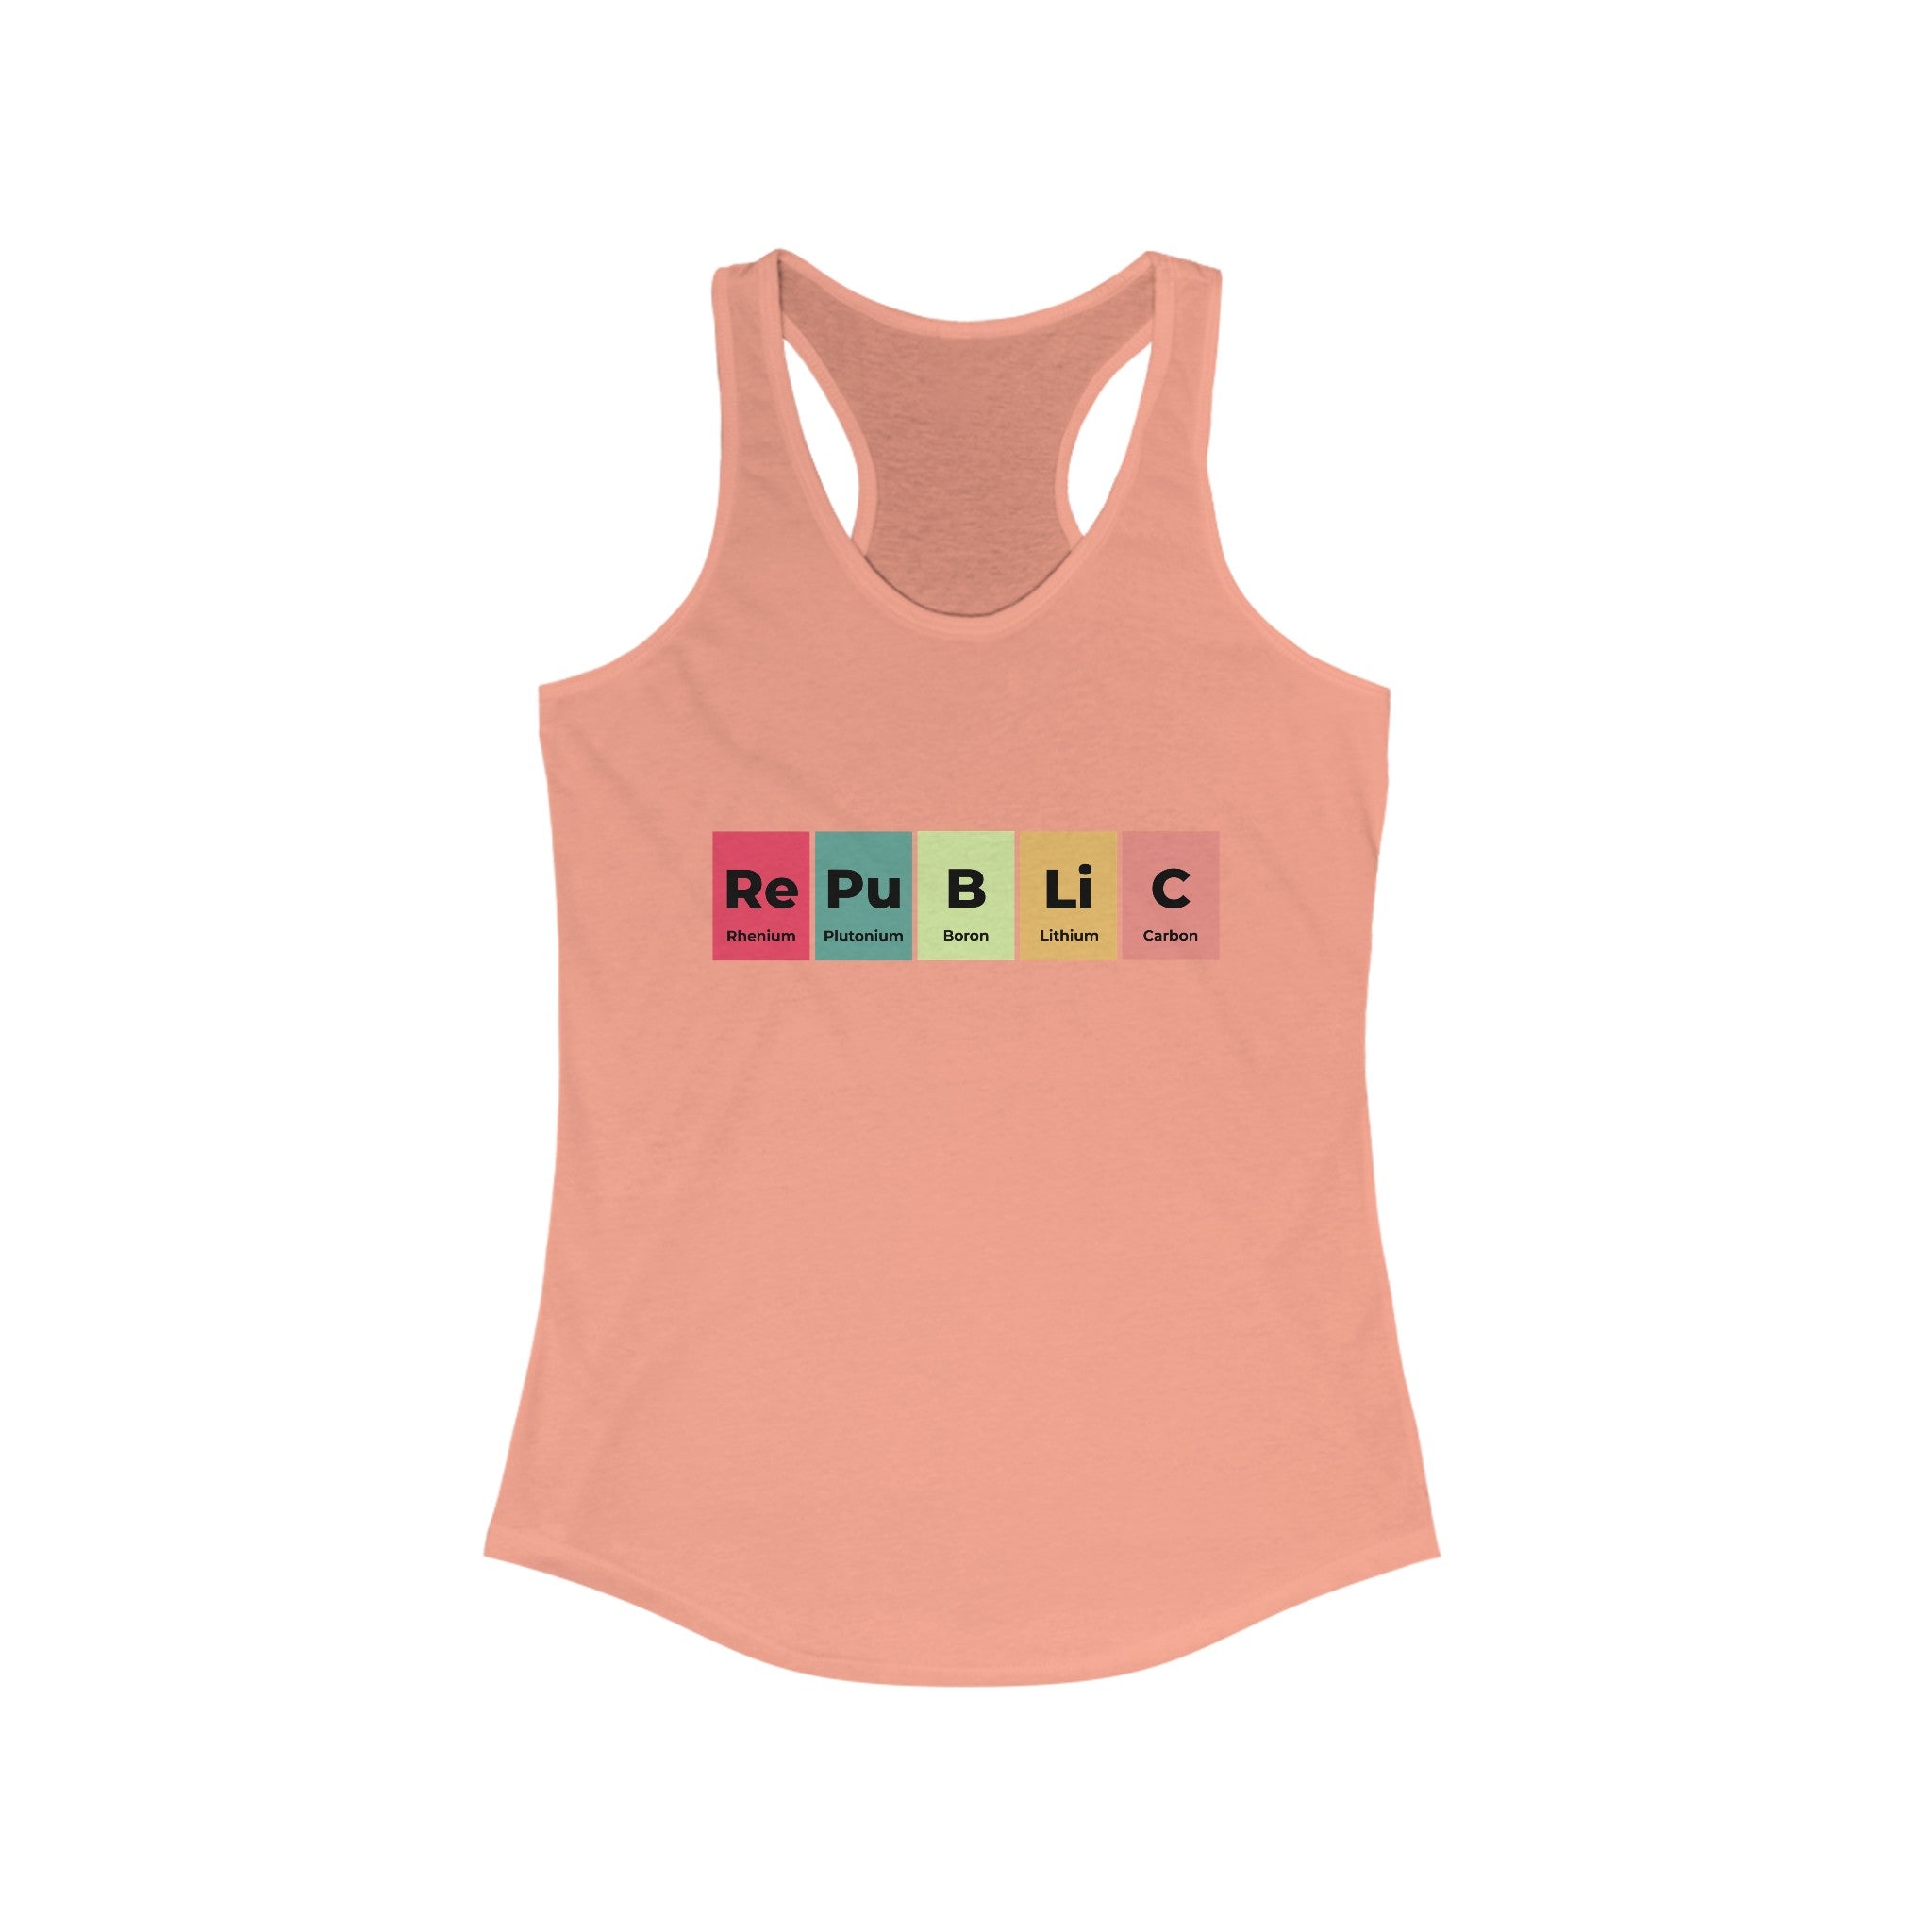 Republic - Women's Racerback Tank: Peach-colored Women's Racerback Tank with "RePuBLiC" written in a style mimicking the periodic table of elements, each letter in a different colored box. Ultra-lightweight and perfect for your fitness journey.